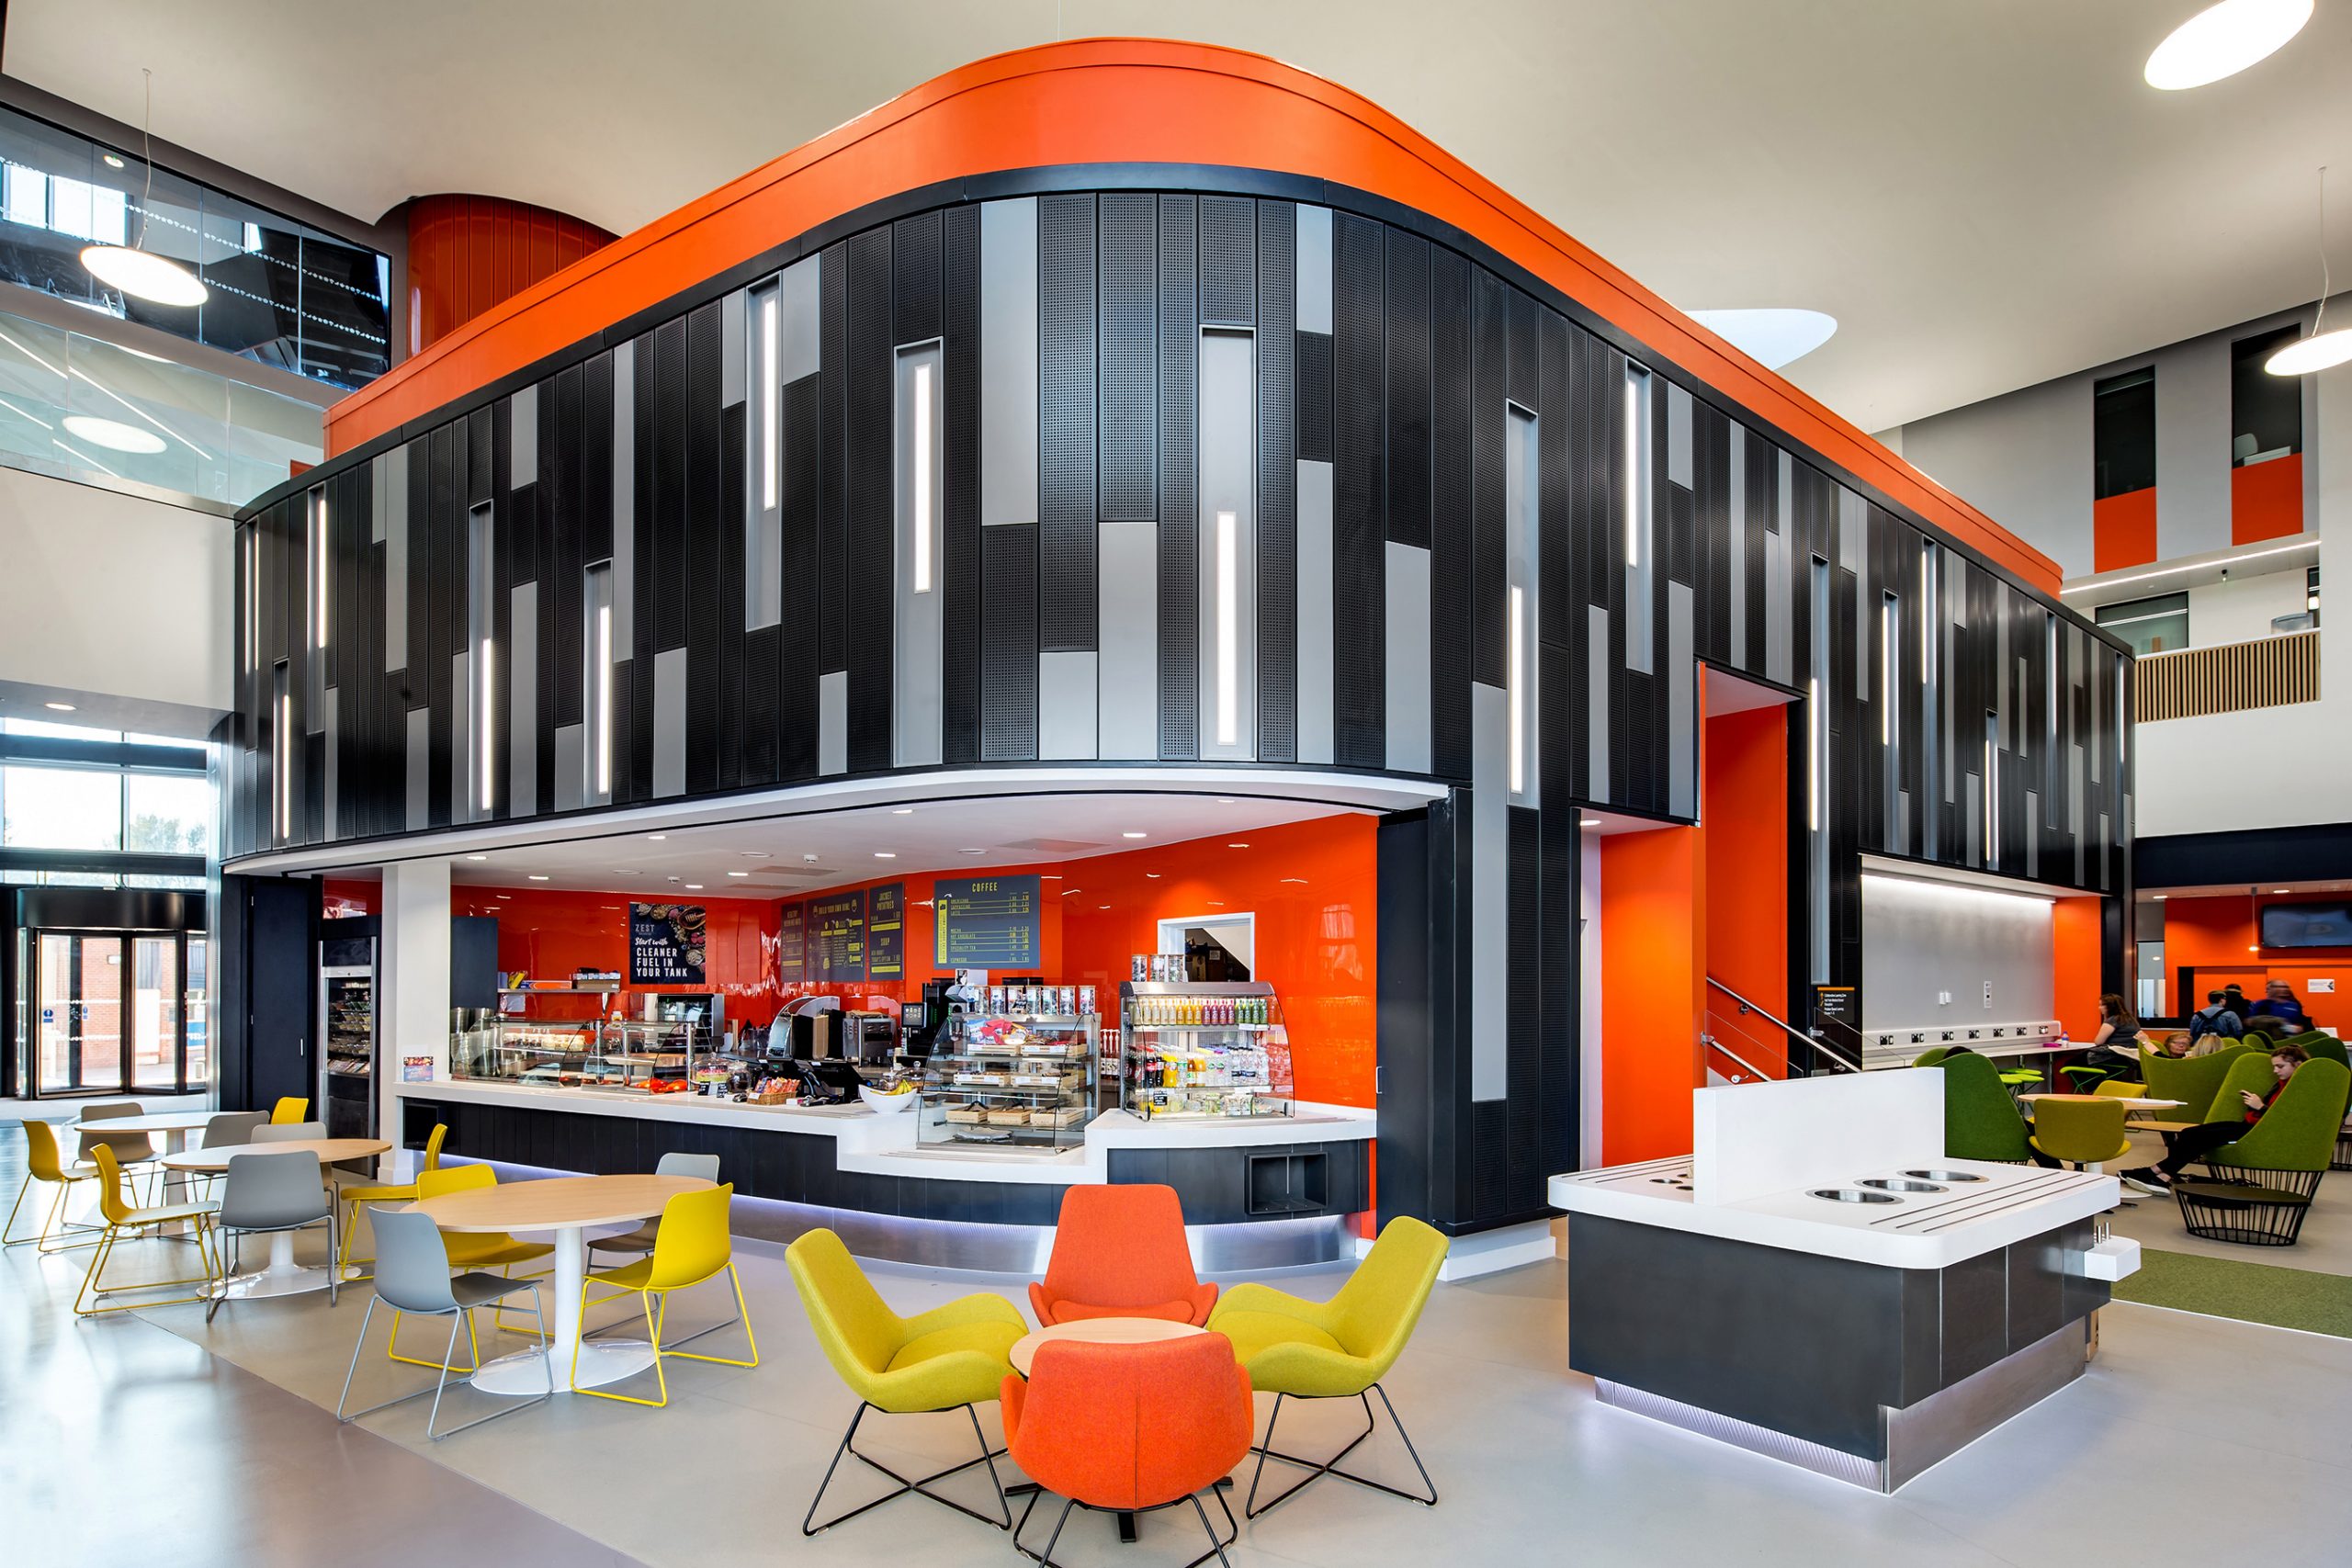 Interior architecture photograph of a refectory at Hull University, East Yorkshire.